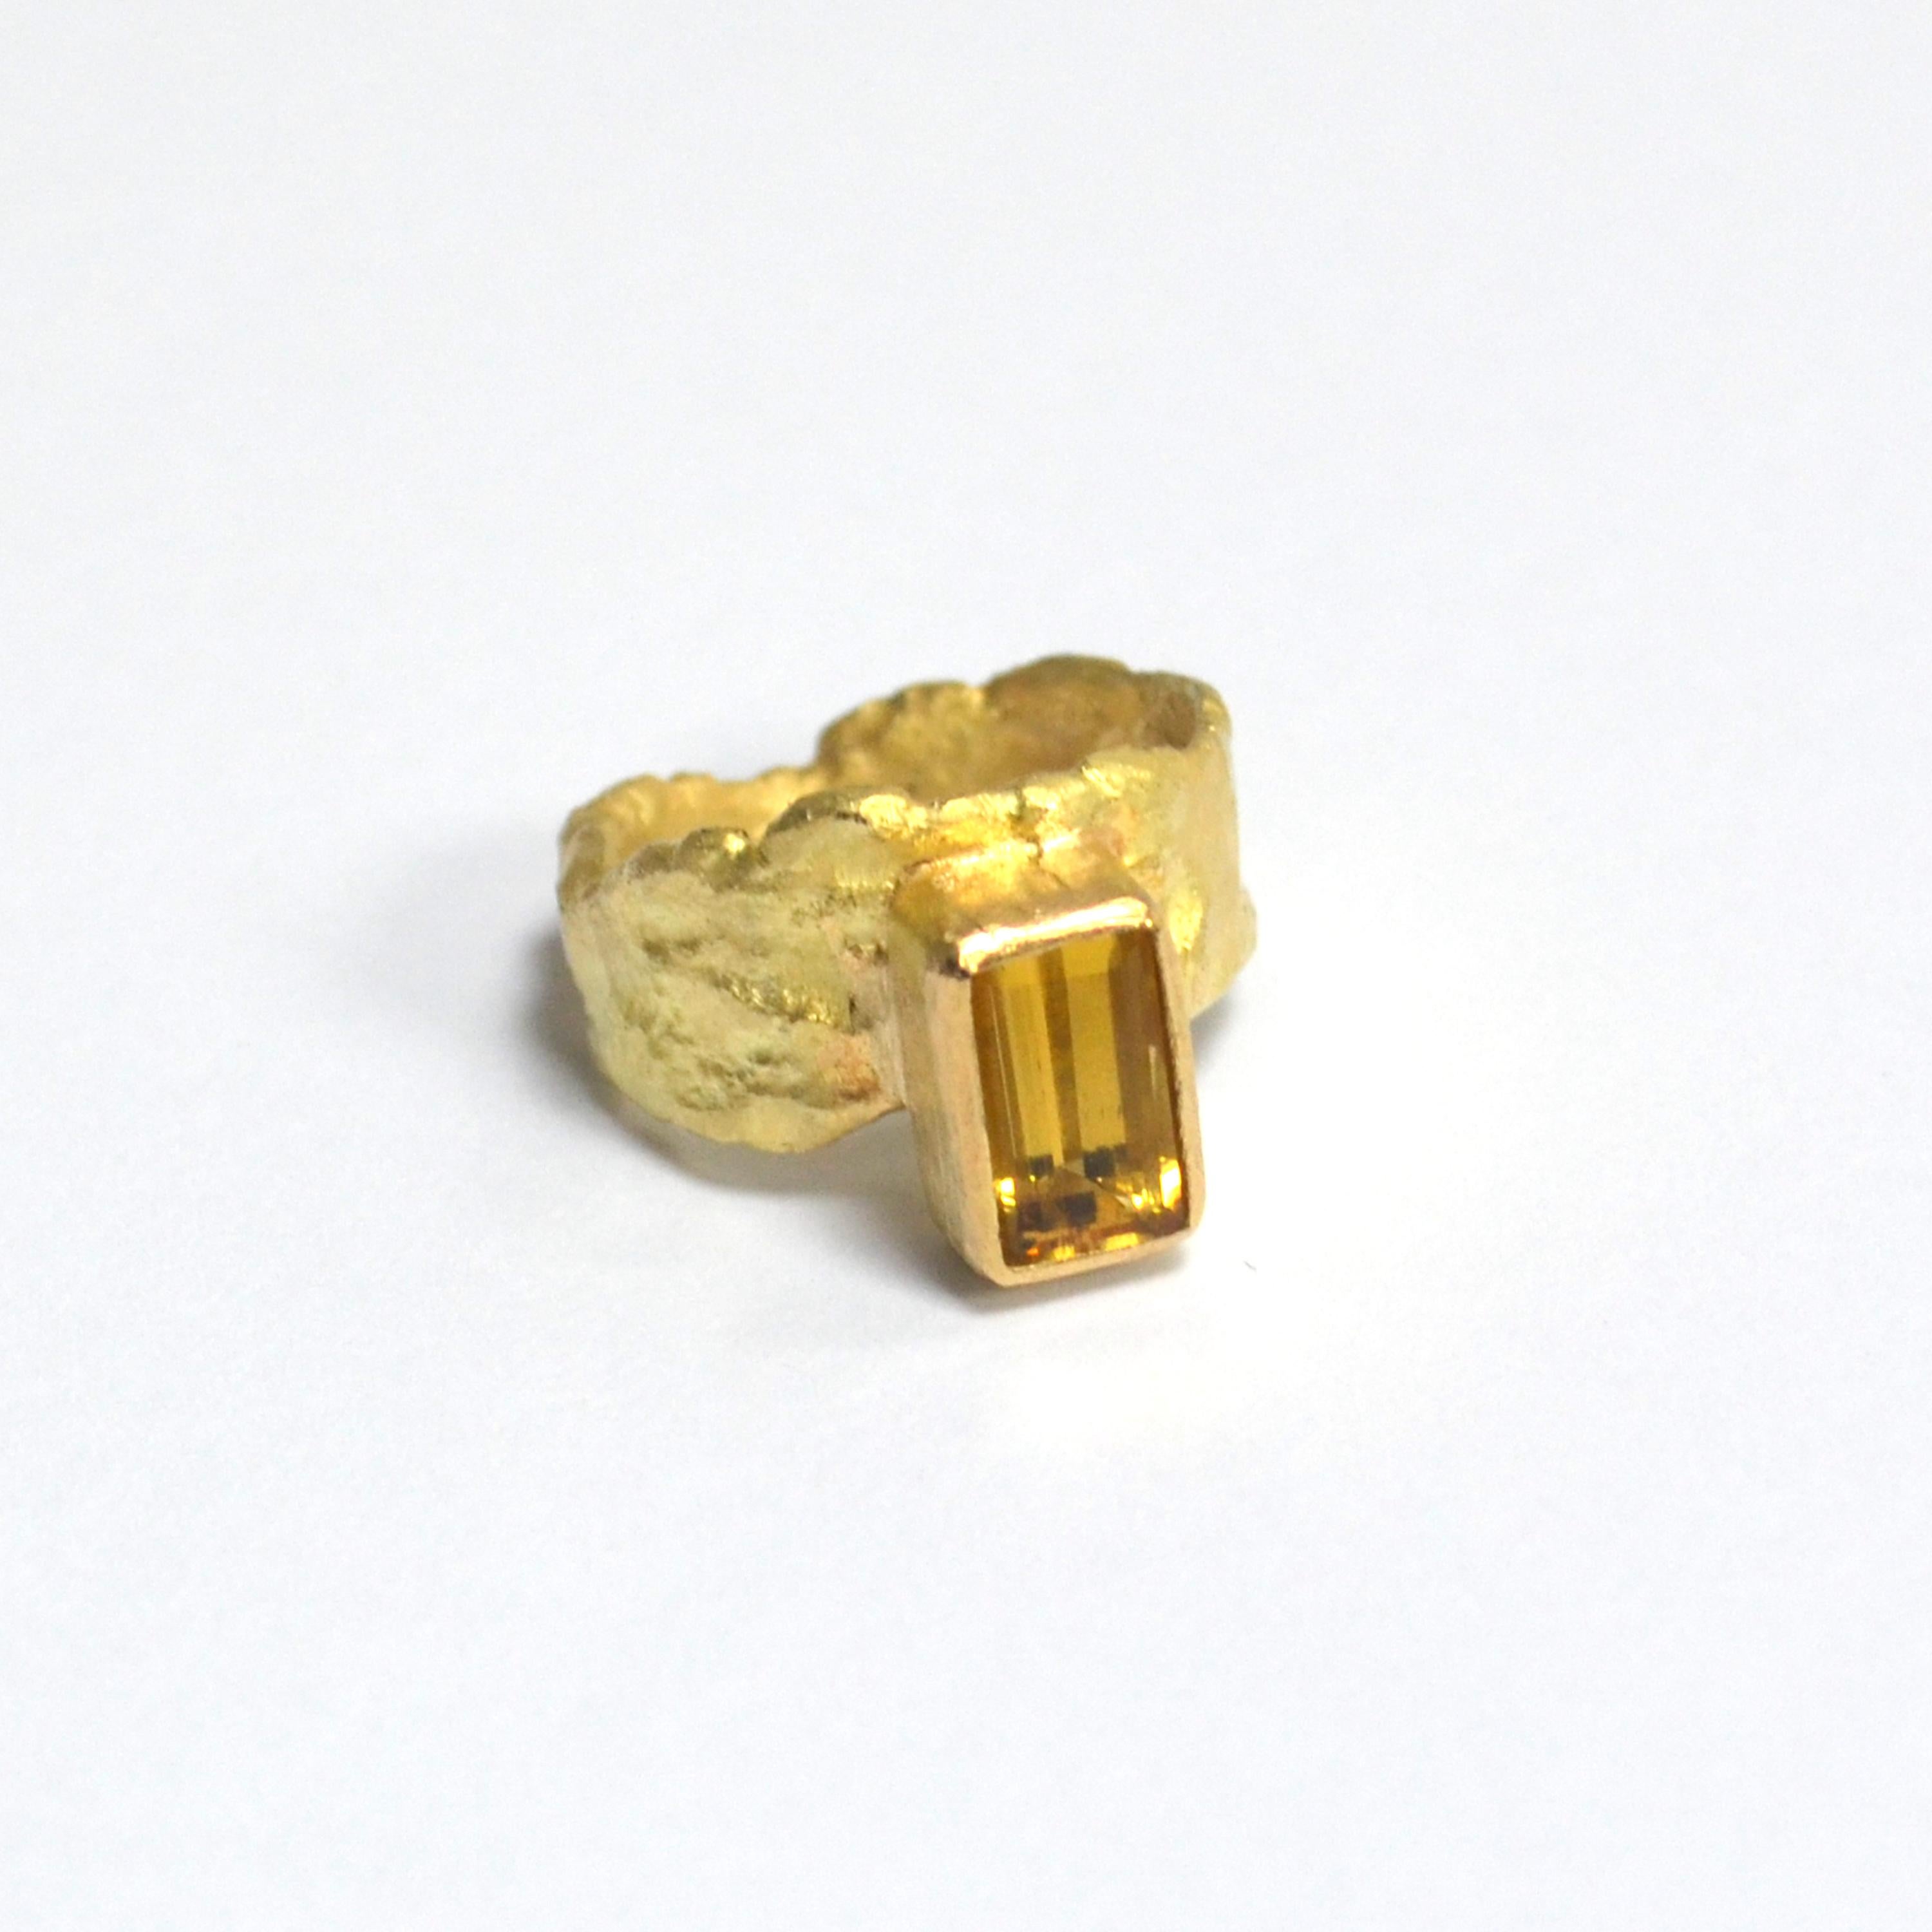 Octagon yellow beryl wide gold textured ring. 

The band narrows at the back for comfort, 11m at widest point, 3mm at narrowest. The gem stone measures 10mmx6mm and is 1.87 cts.

Disa Allsopp makes by hand each ring using traditional reticulation